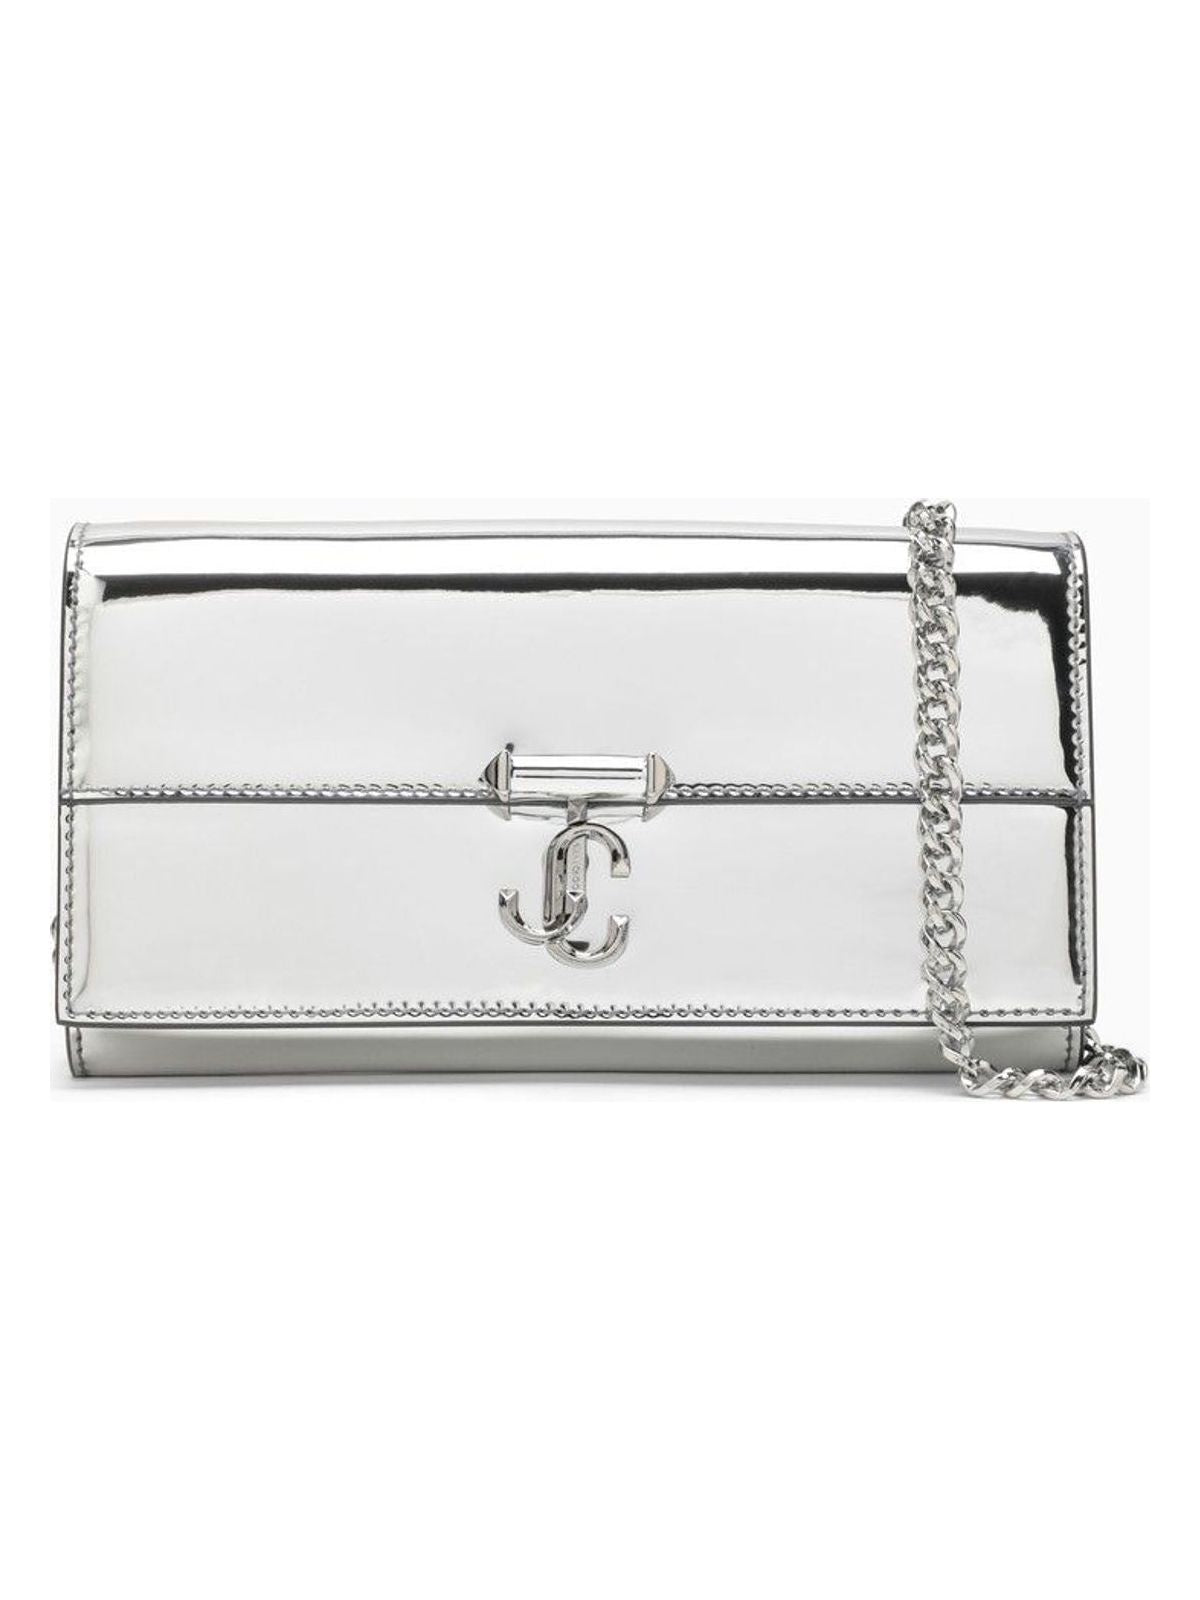 SI JIMMY CHOO  AVENUE SILVER LEATHER CHAIN WALLET